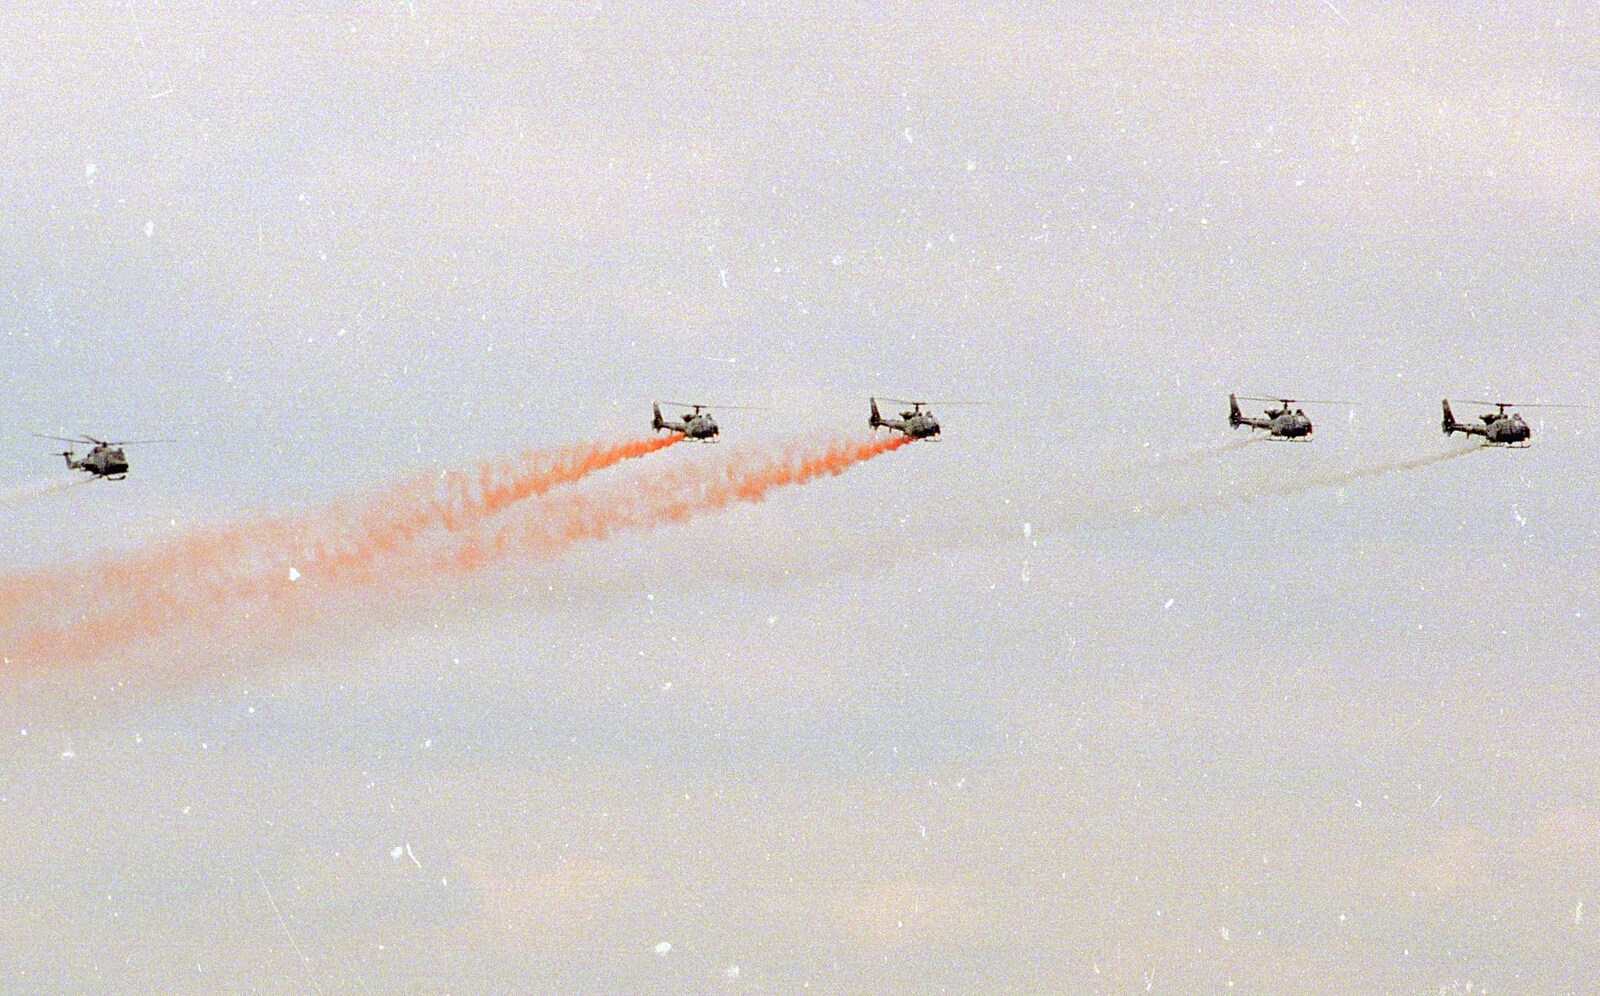 A helicopter aerobatic display from The Mildenhall Air Fete, Mildenhall, Suffolk - 29th May 1994